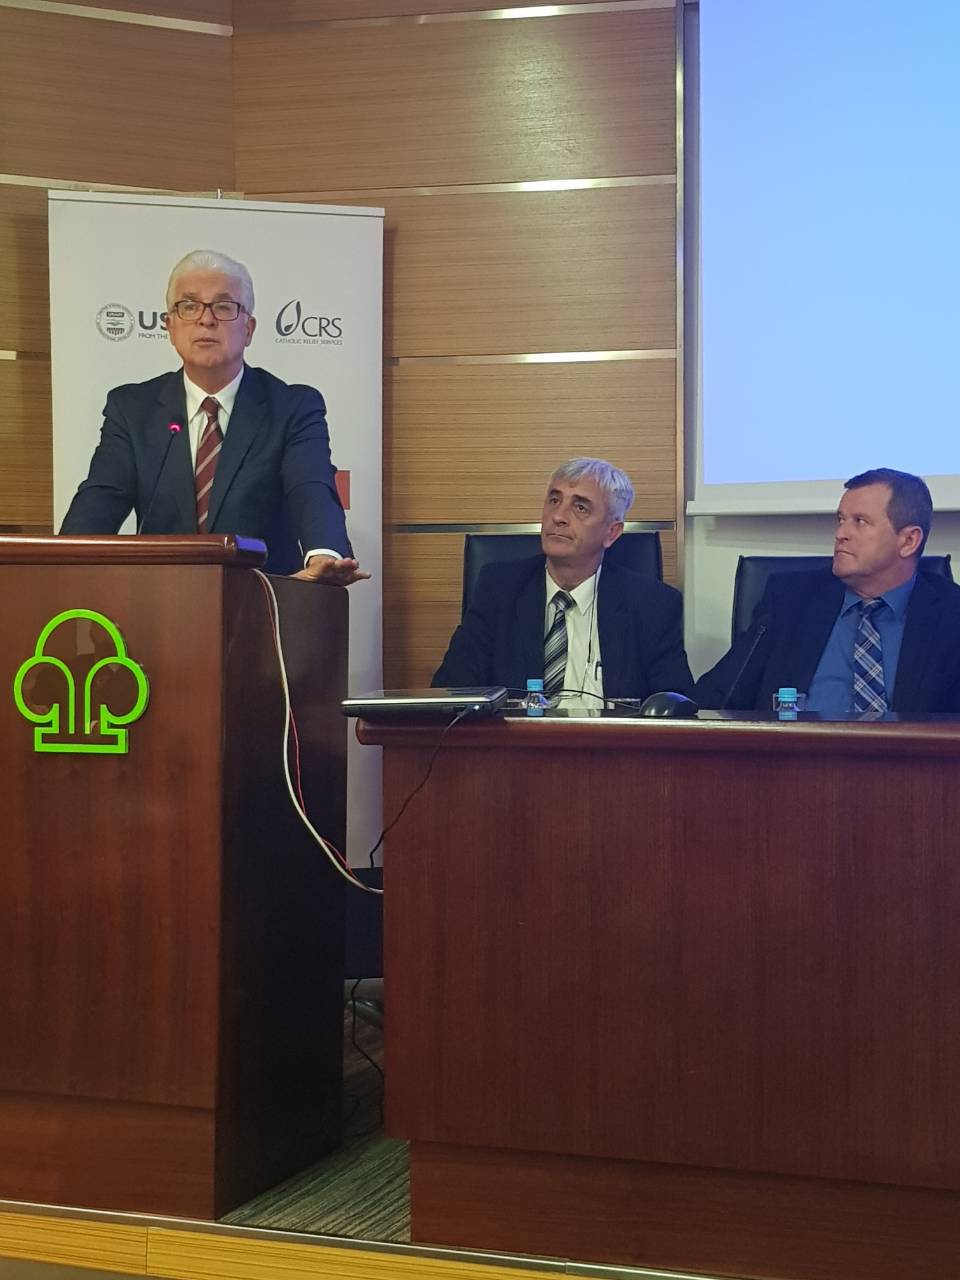 Conference on promotion of new business friendly municipalities in Bosnia and Herzegovina